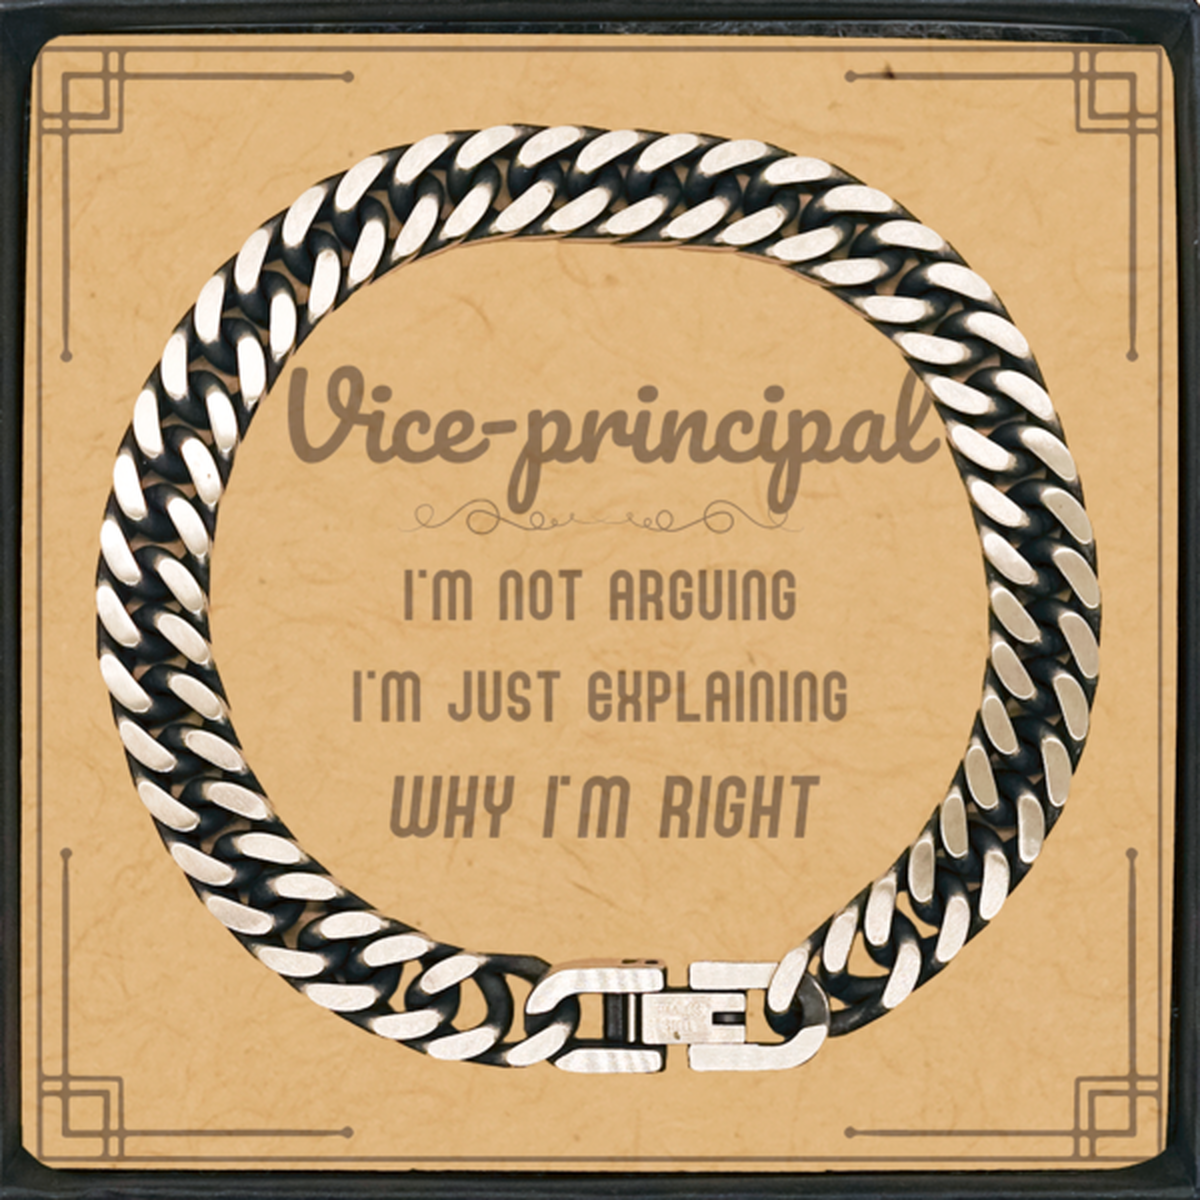 Vice-principal I'm not Arguing. I'm Just Explaining Why I'm RIGHT Cuban Link Chain Bracelet, Funny Saying Quote Vice-principal Gifts For Vice-principal Message Card Graduation Birthday Christmas Gifts for Men Women Coworker